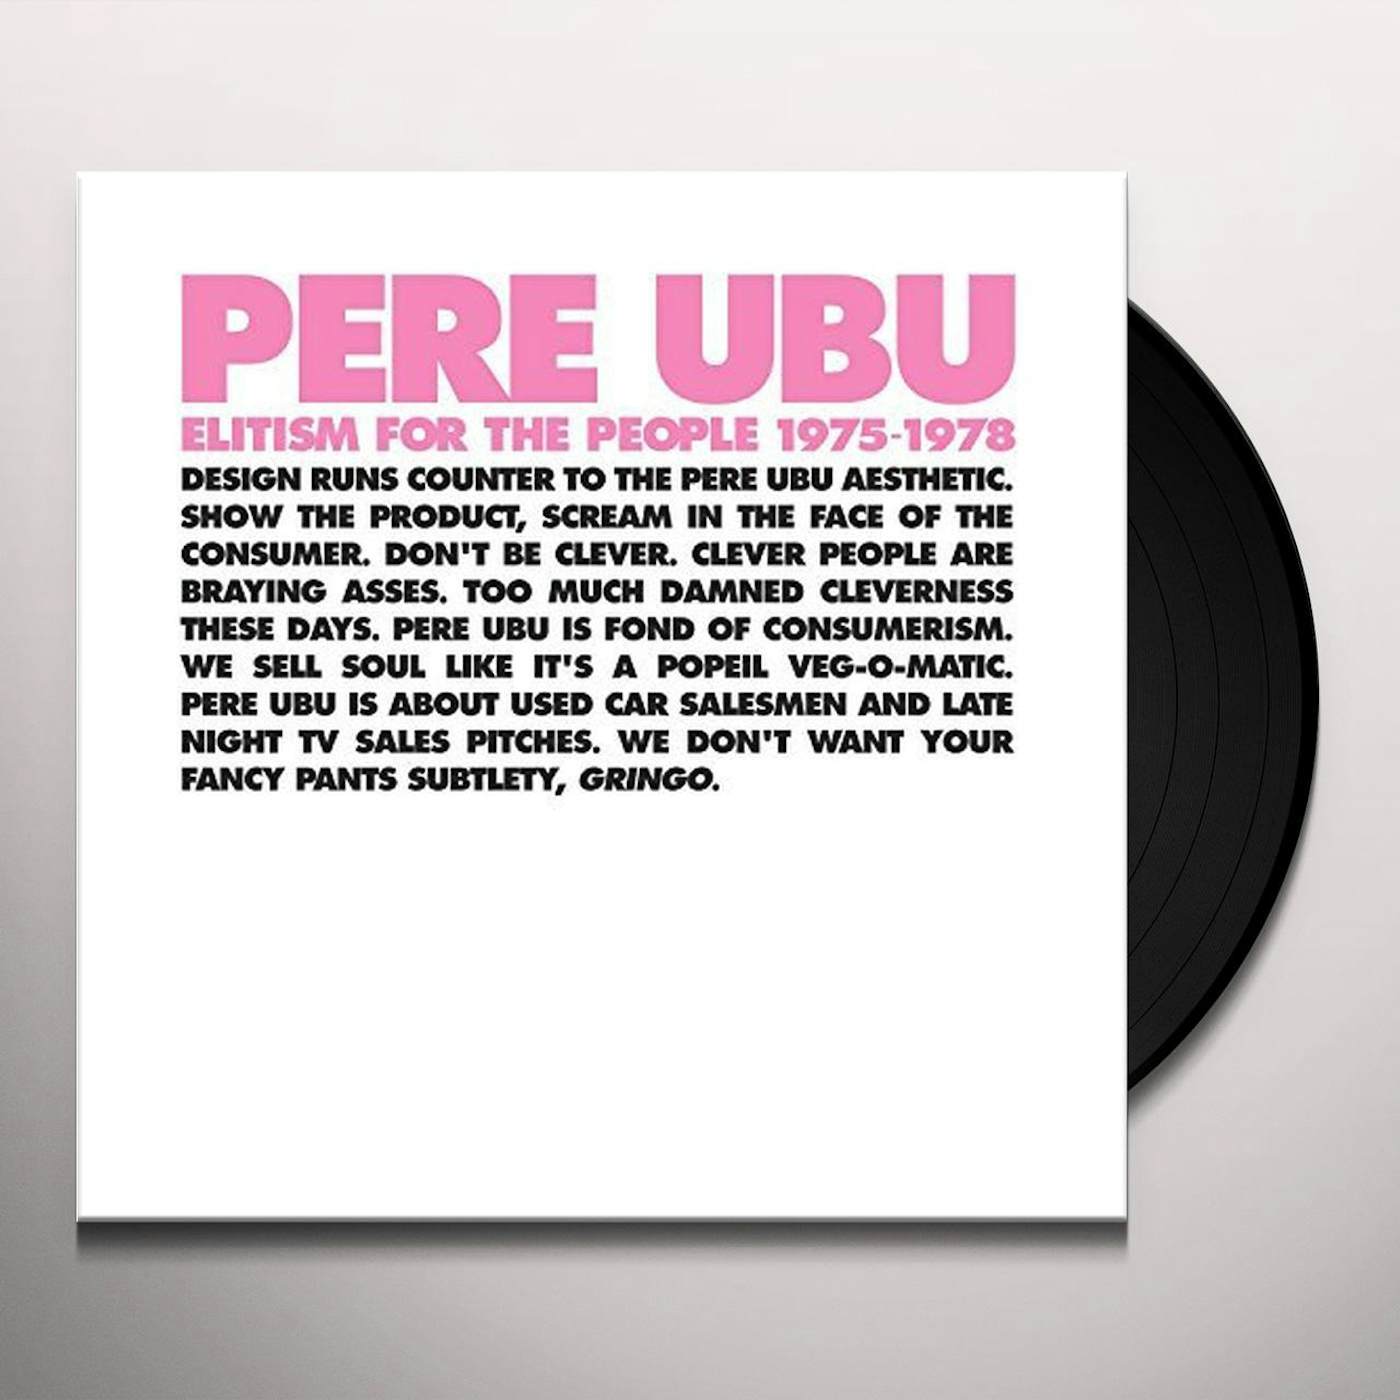 Pere Ubu ELITISM FOR THE PEOPLE 1975-1978 Vinyl Record